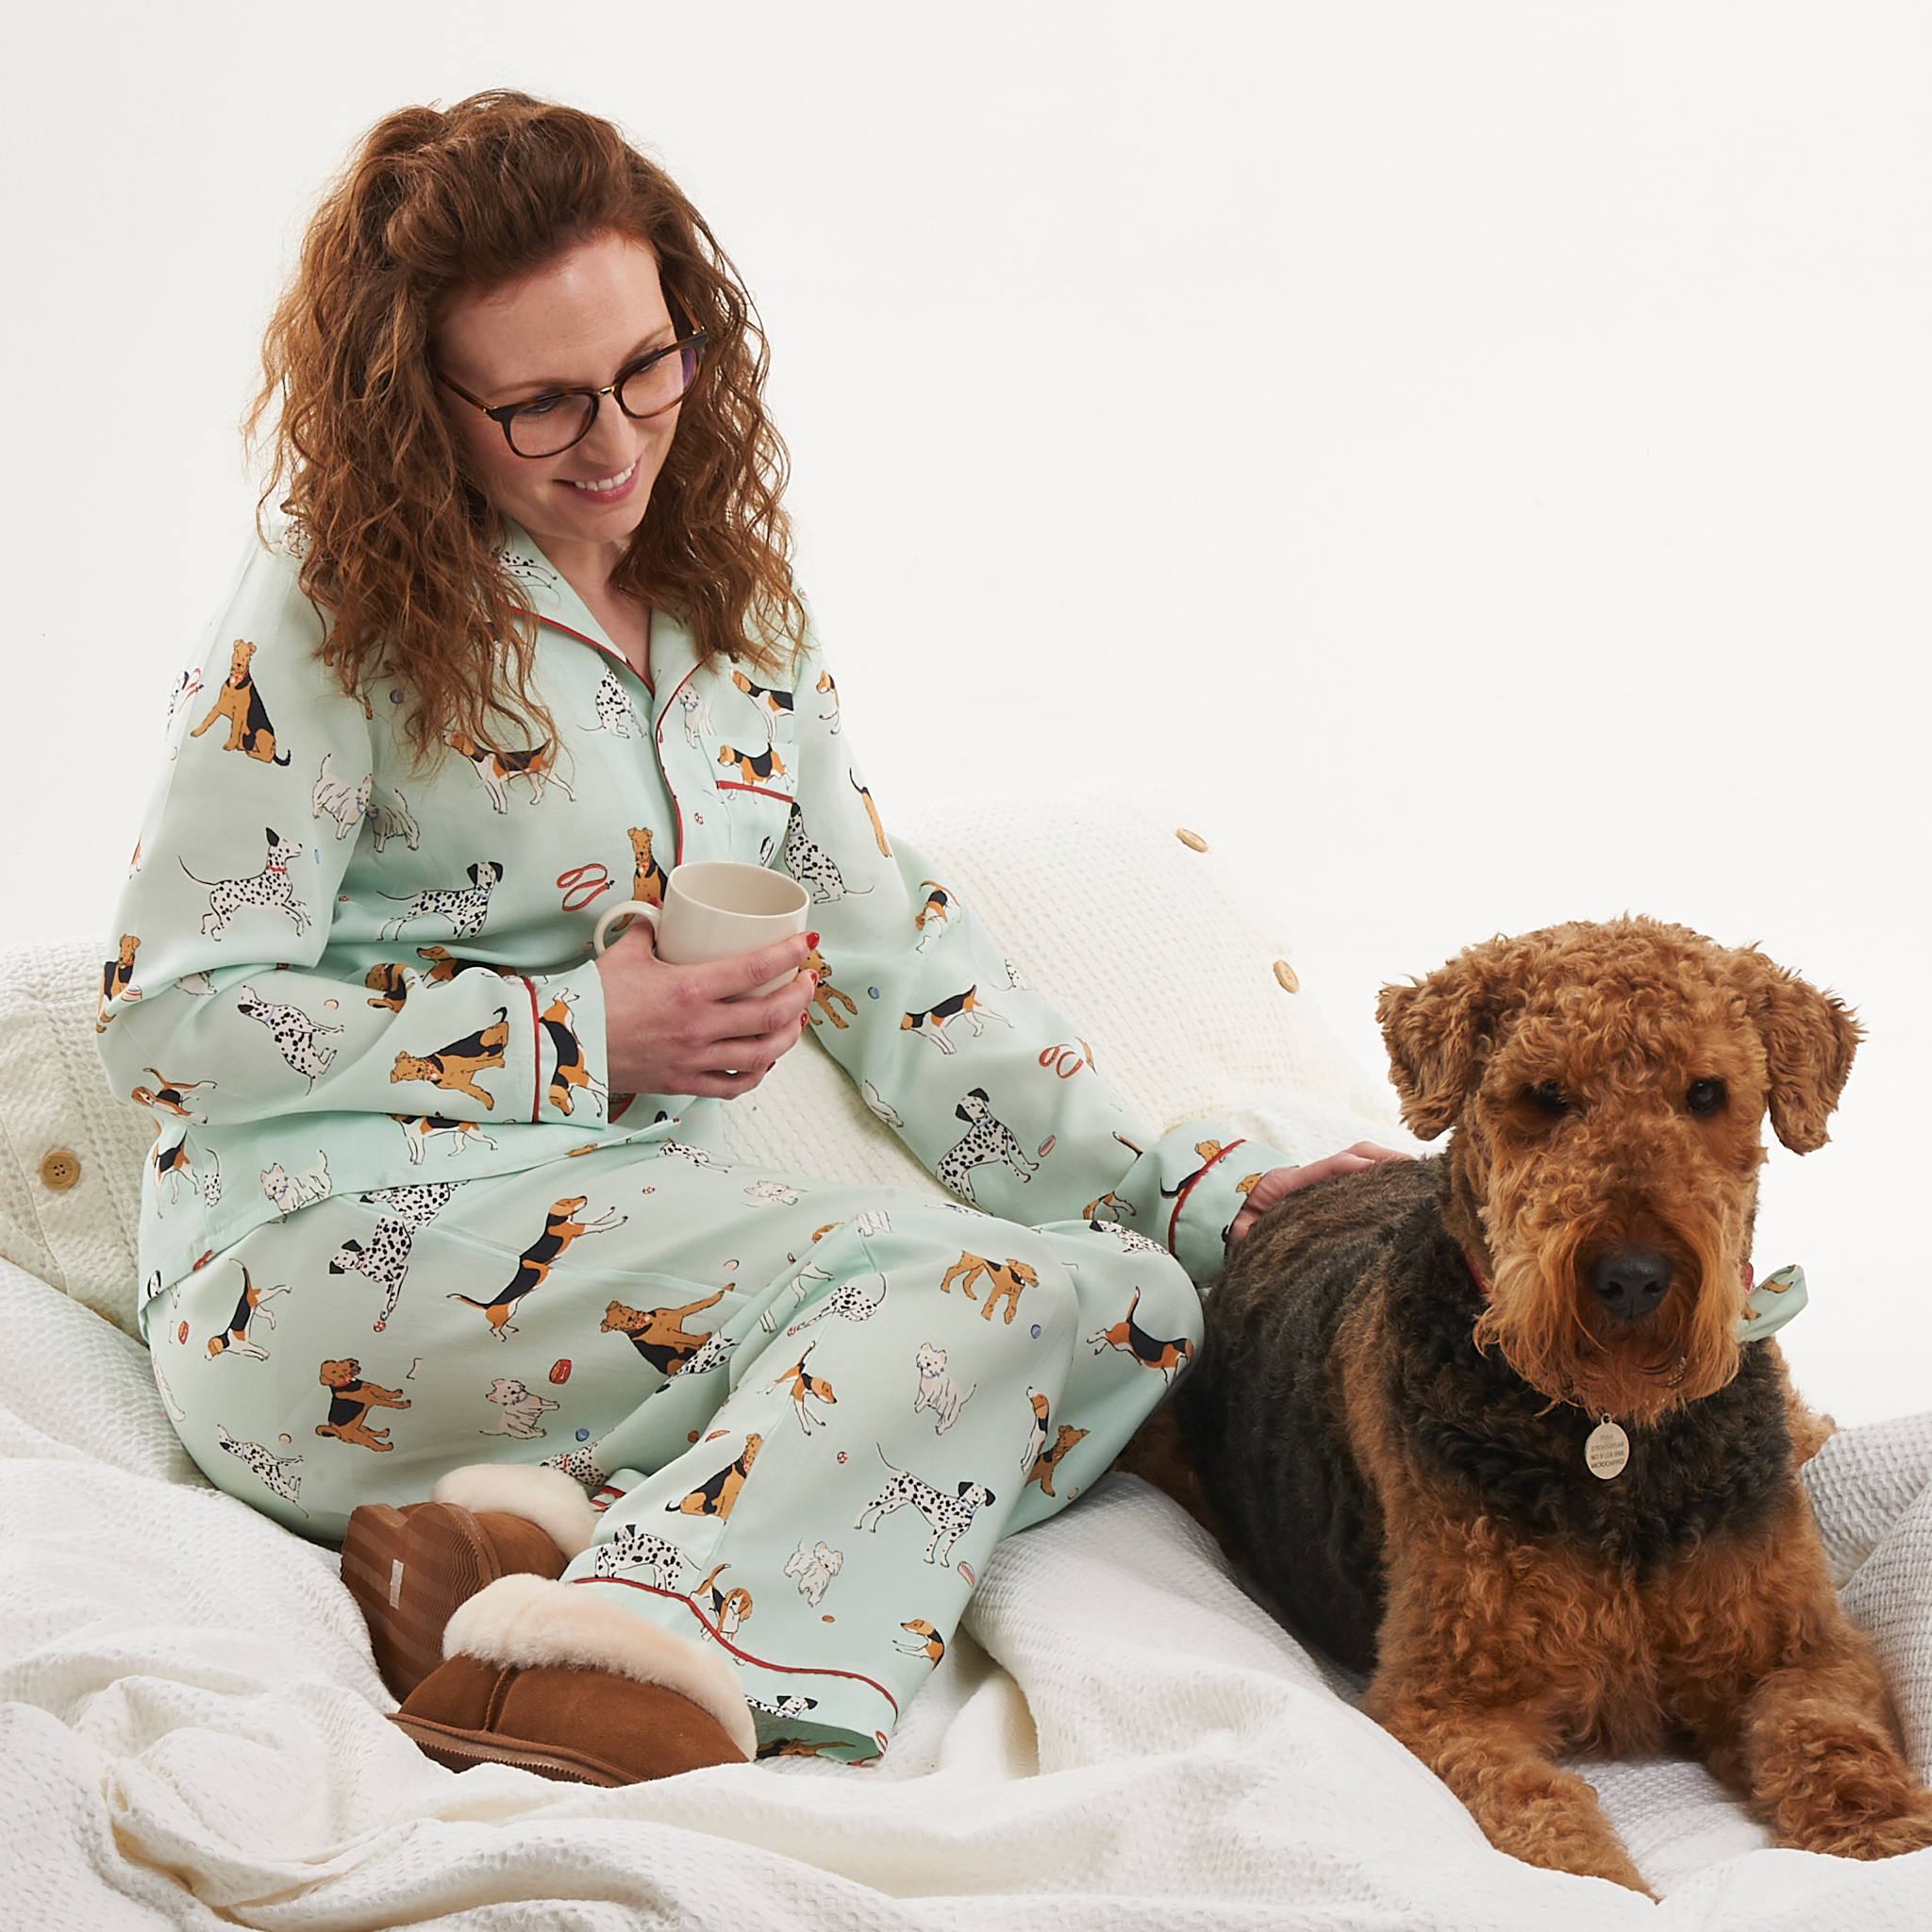 Tessie Clothing Poppy Dog Print Pyjamas Set showing a model and Airedale Terrier, sat on bedding in the pyjamas